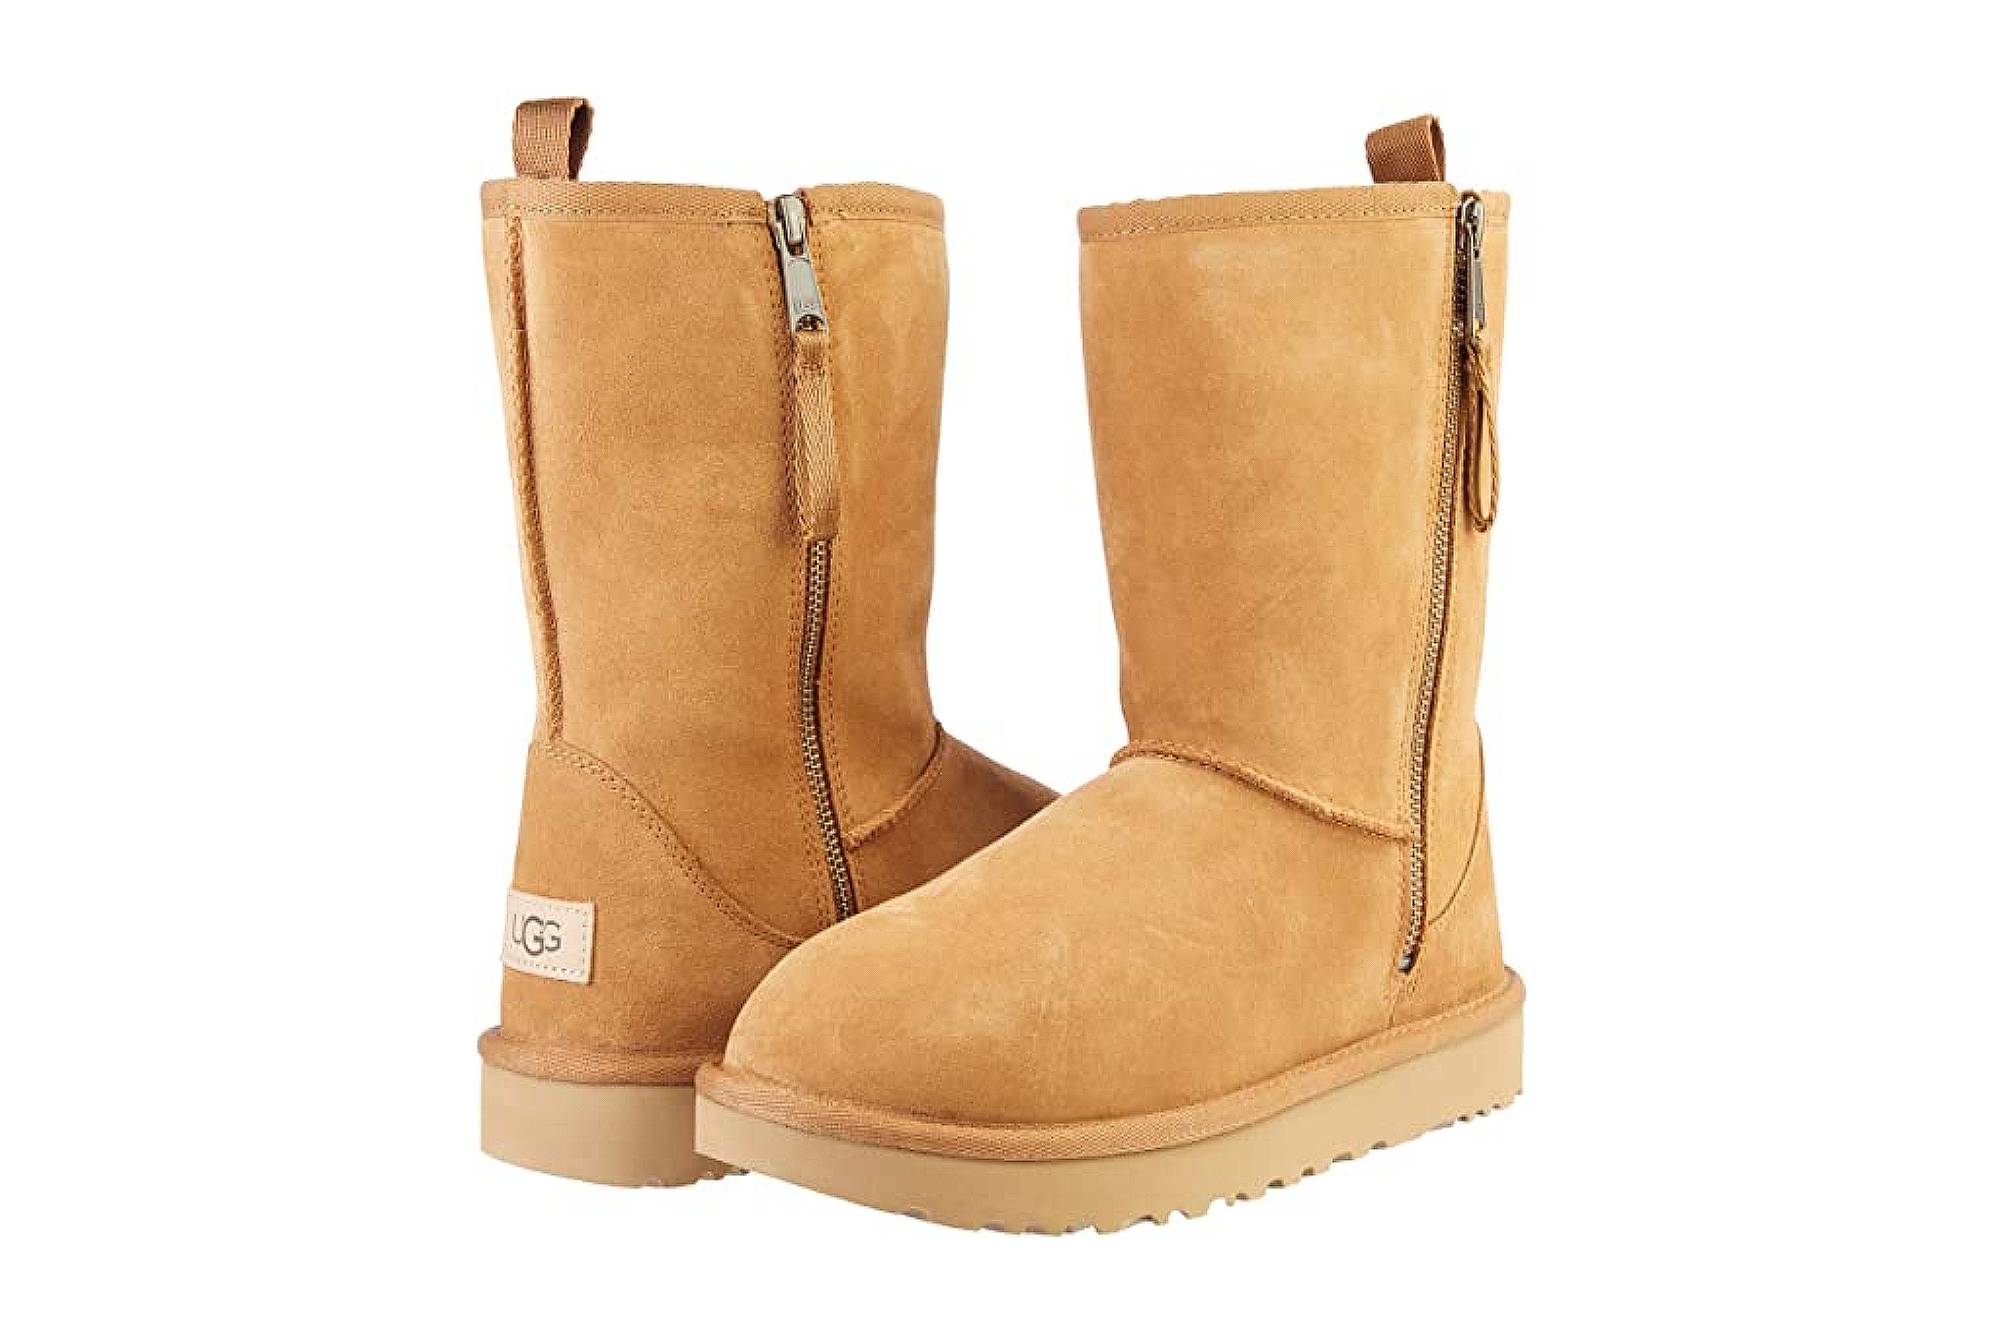 Bedachtzaam Matig Oprechtheid UGG Just Released a New Zappos-Exclusive Winter Boot Collection